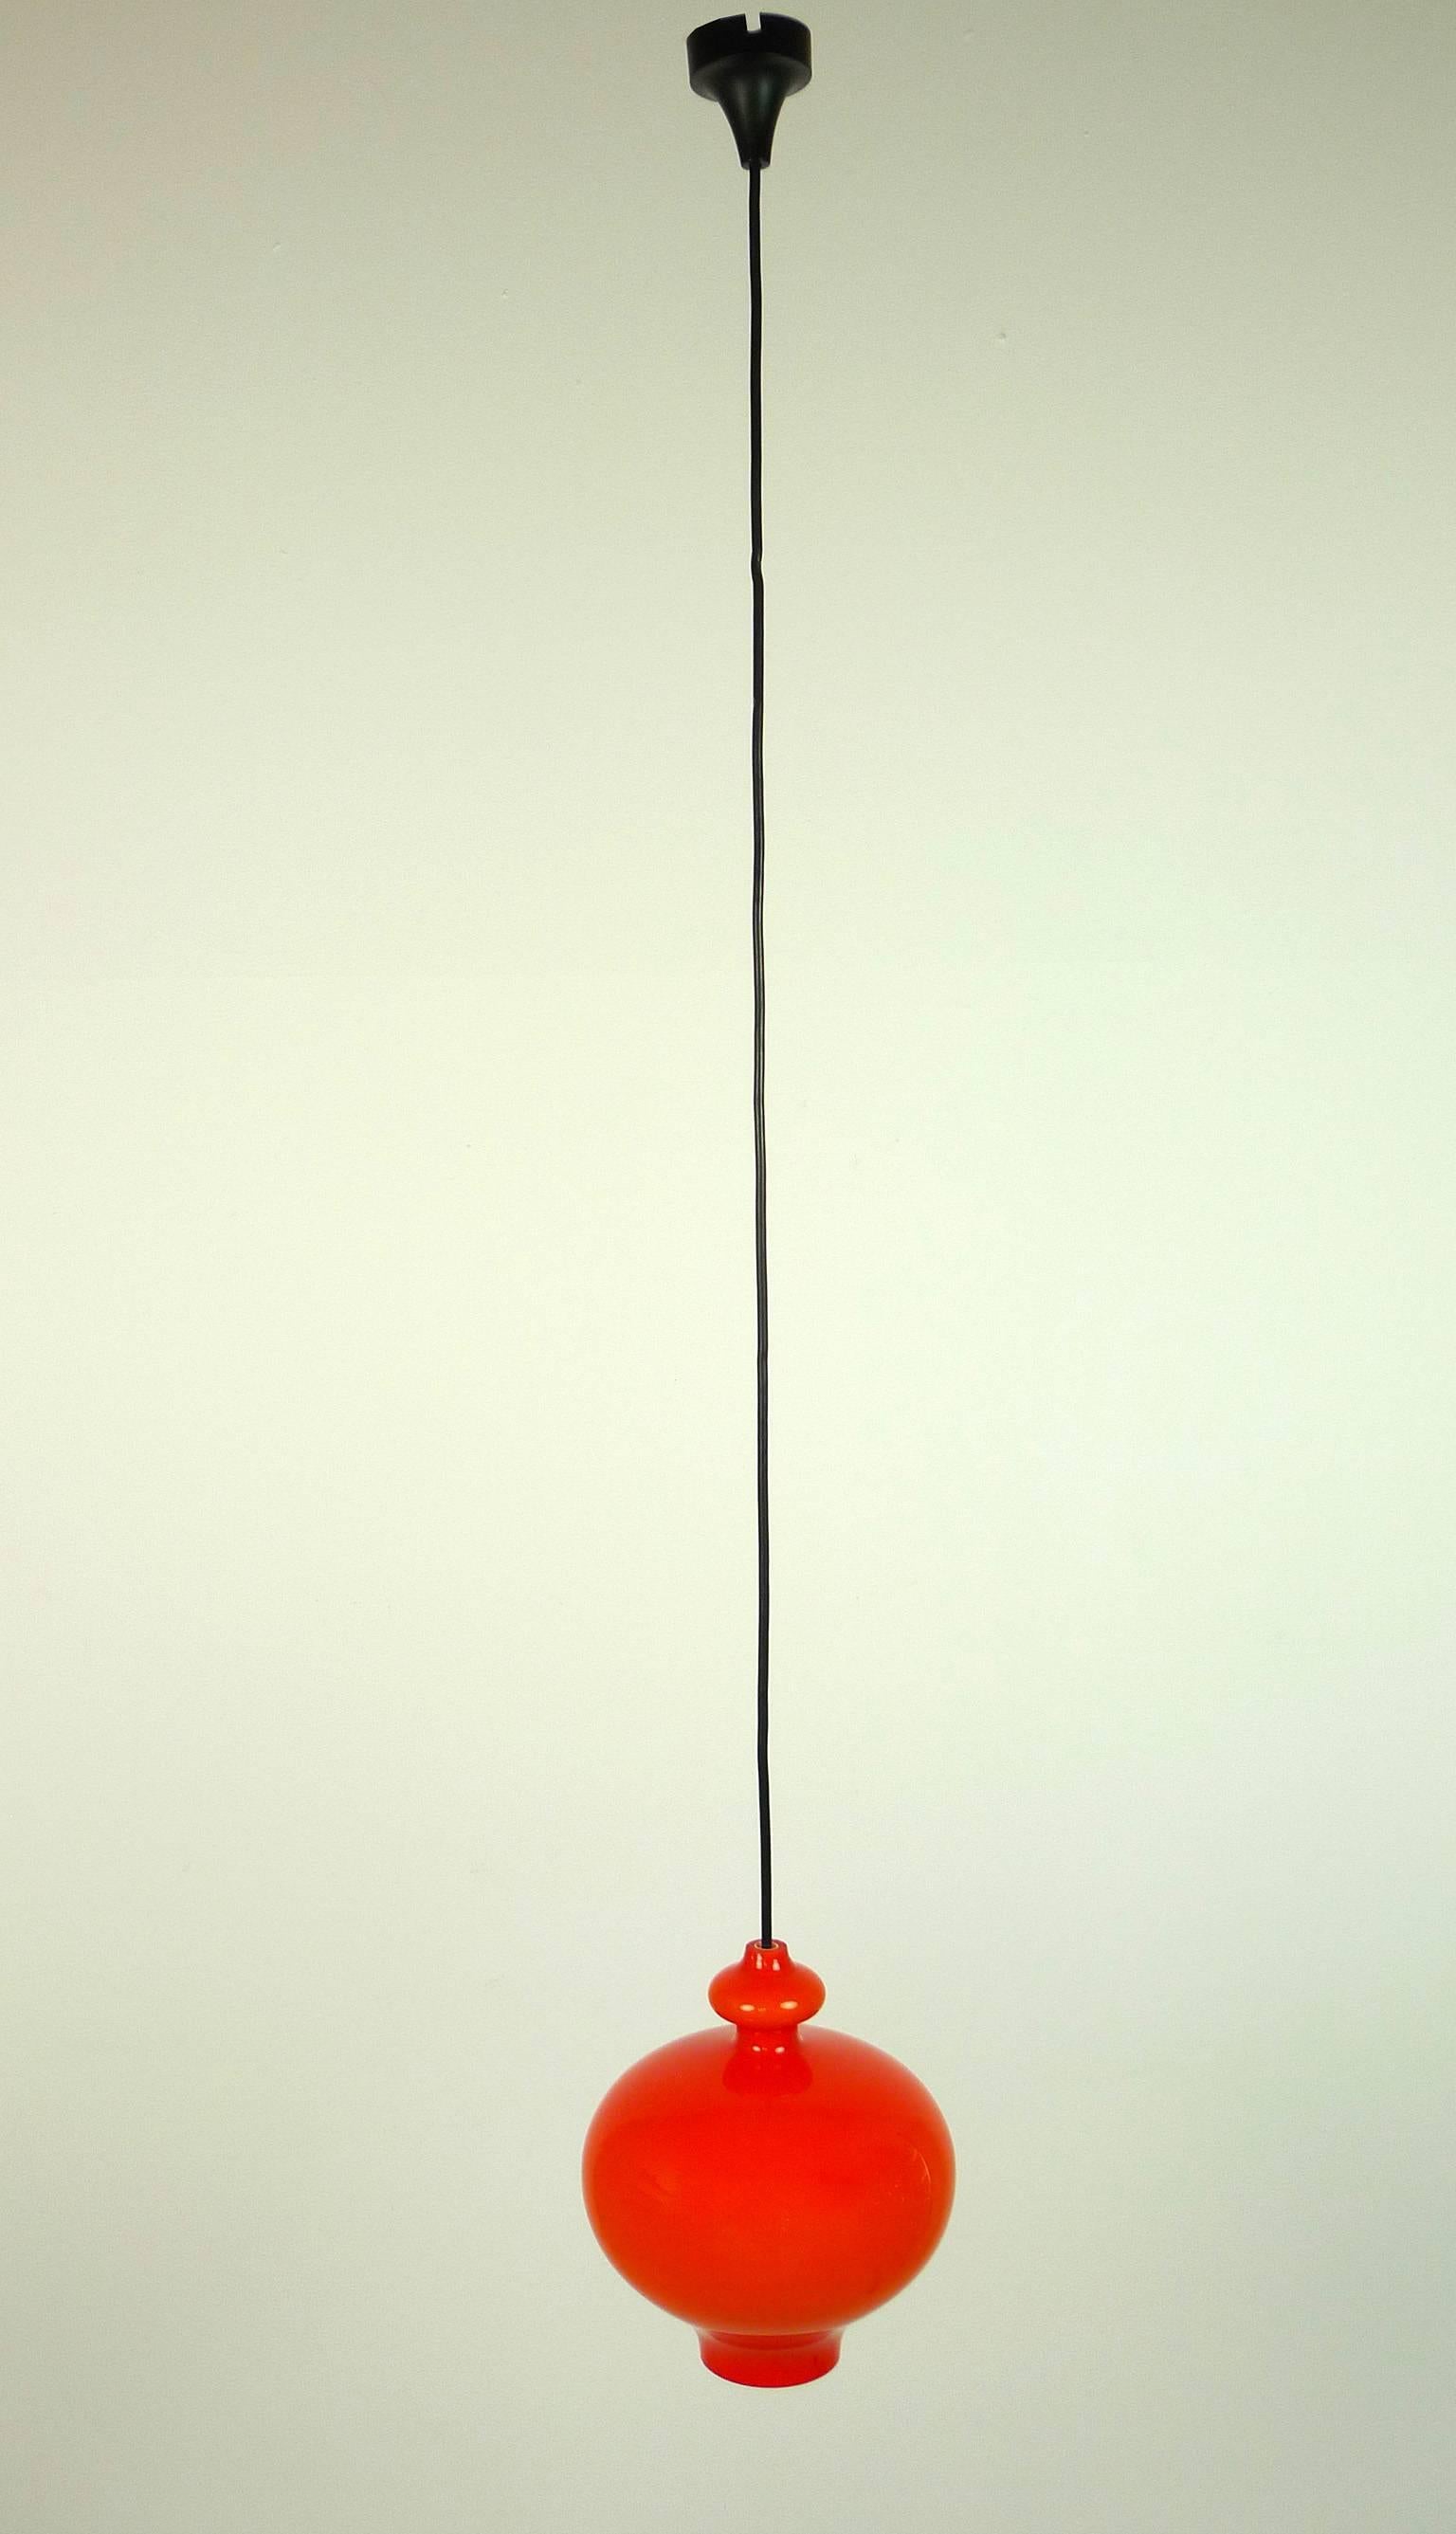 The orange onion body of the pendant lamp is made of handblown glass from Holmegaard and has one E 27 bulb holder inside. The lamp was produced by the German manufacturer Staff Leuchten in the 1960s. It is wired for German standard and in excellent